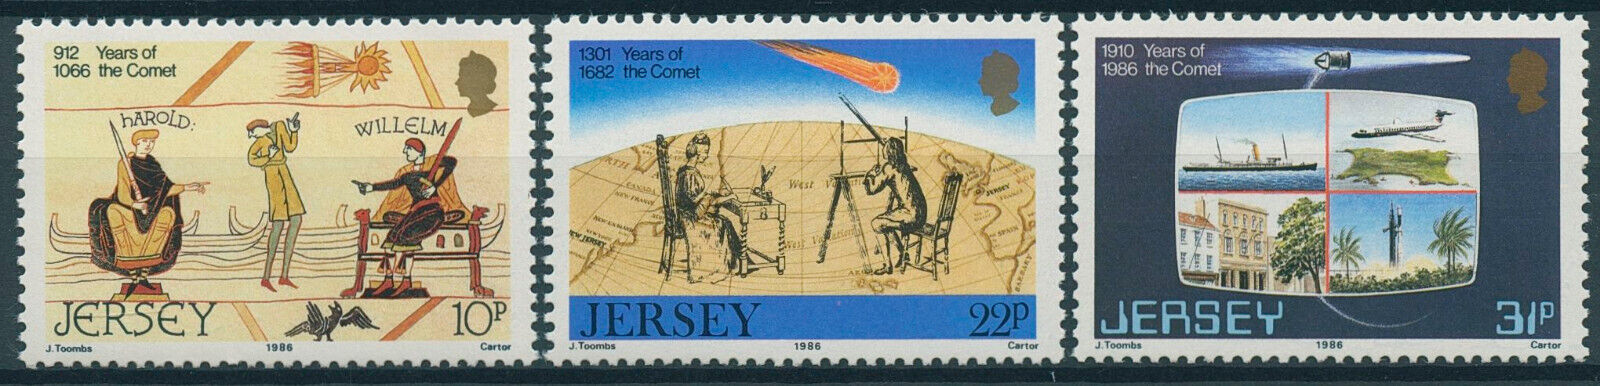 Jersey 1986 MNH Space Stamps Halley's Comet Astronomy Comets 3v Set